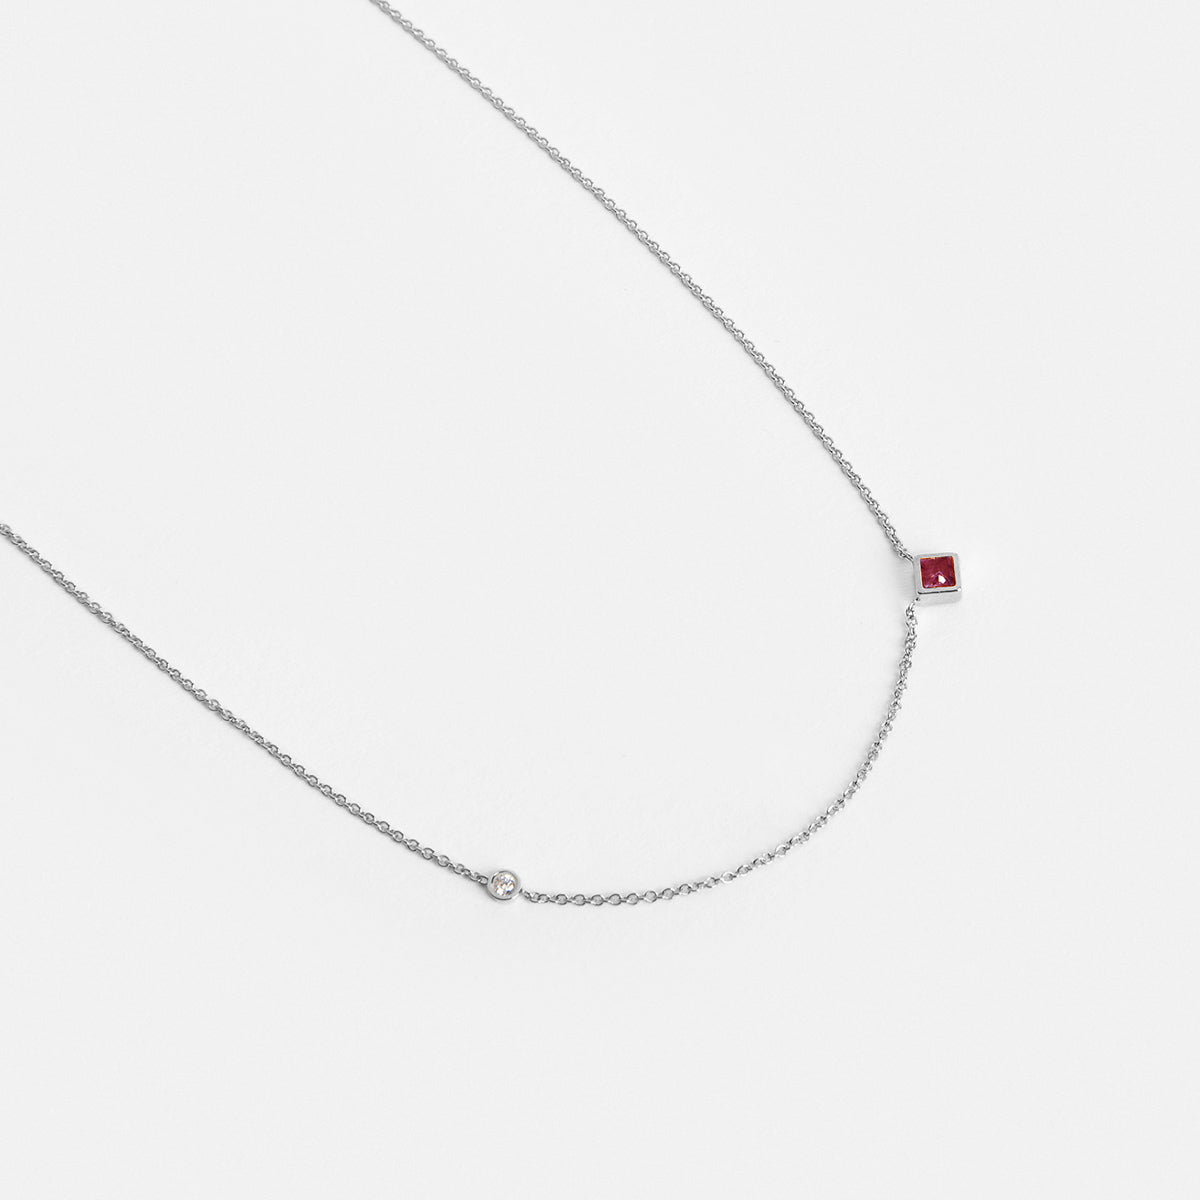 Isu Unique Necklace in 14k White Gold set with White Diamond and Ruby By SHW Fine Jewelry NYC